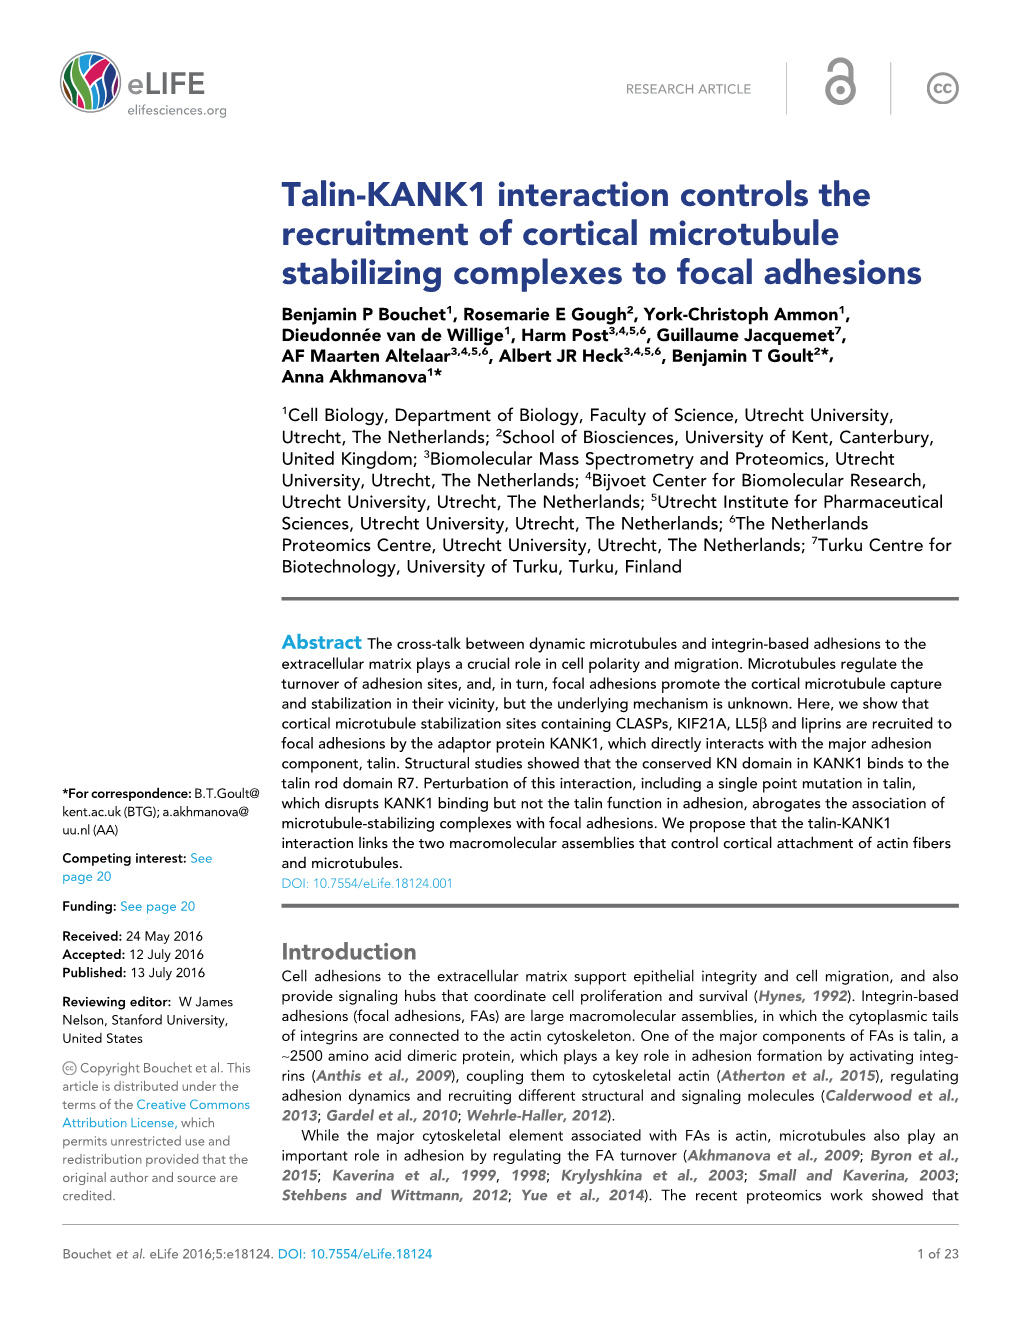 Talin-KANK1 Interaction Controls the Recruitment of Cortical Microtubule